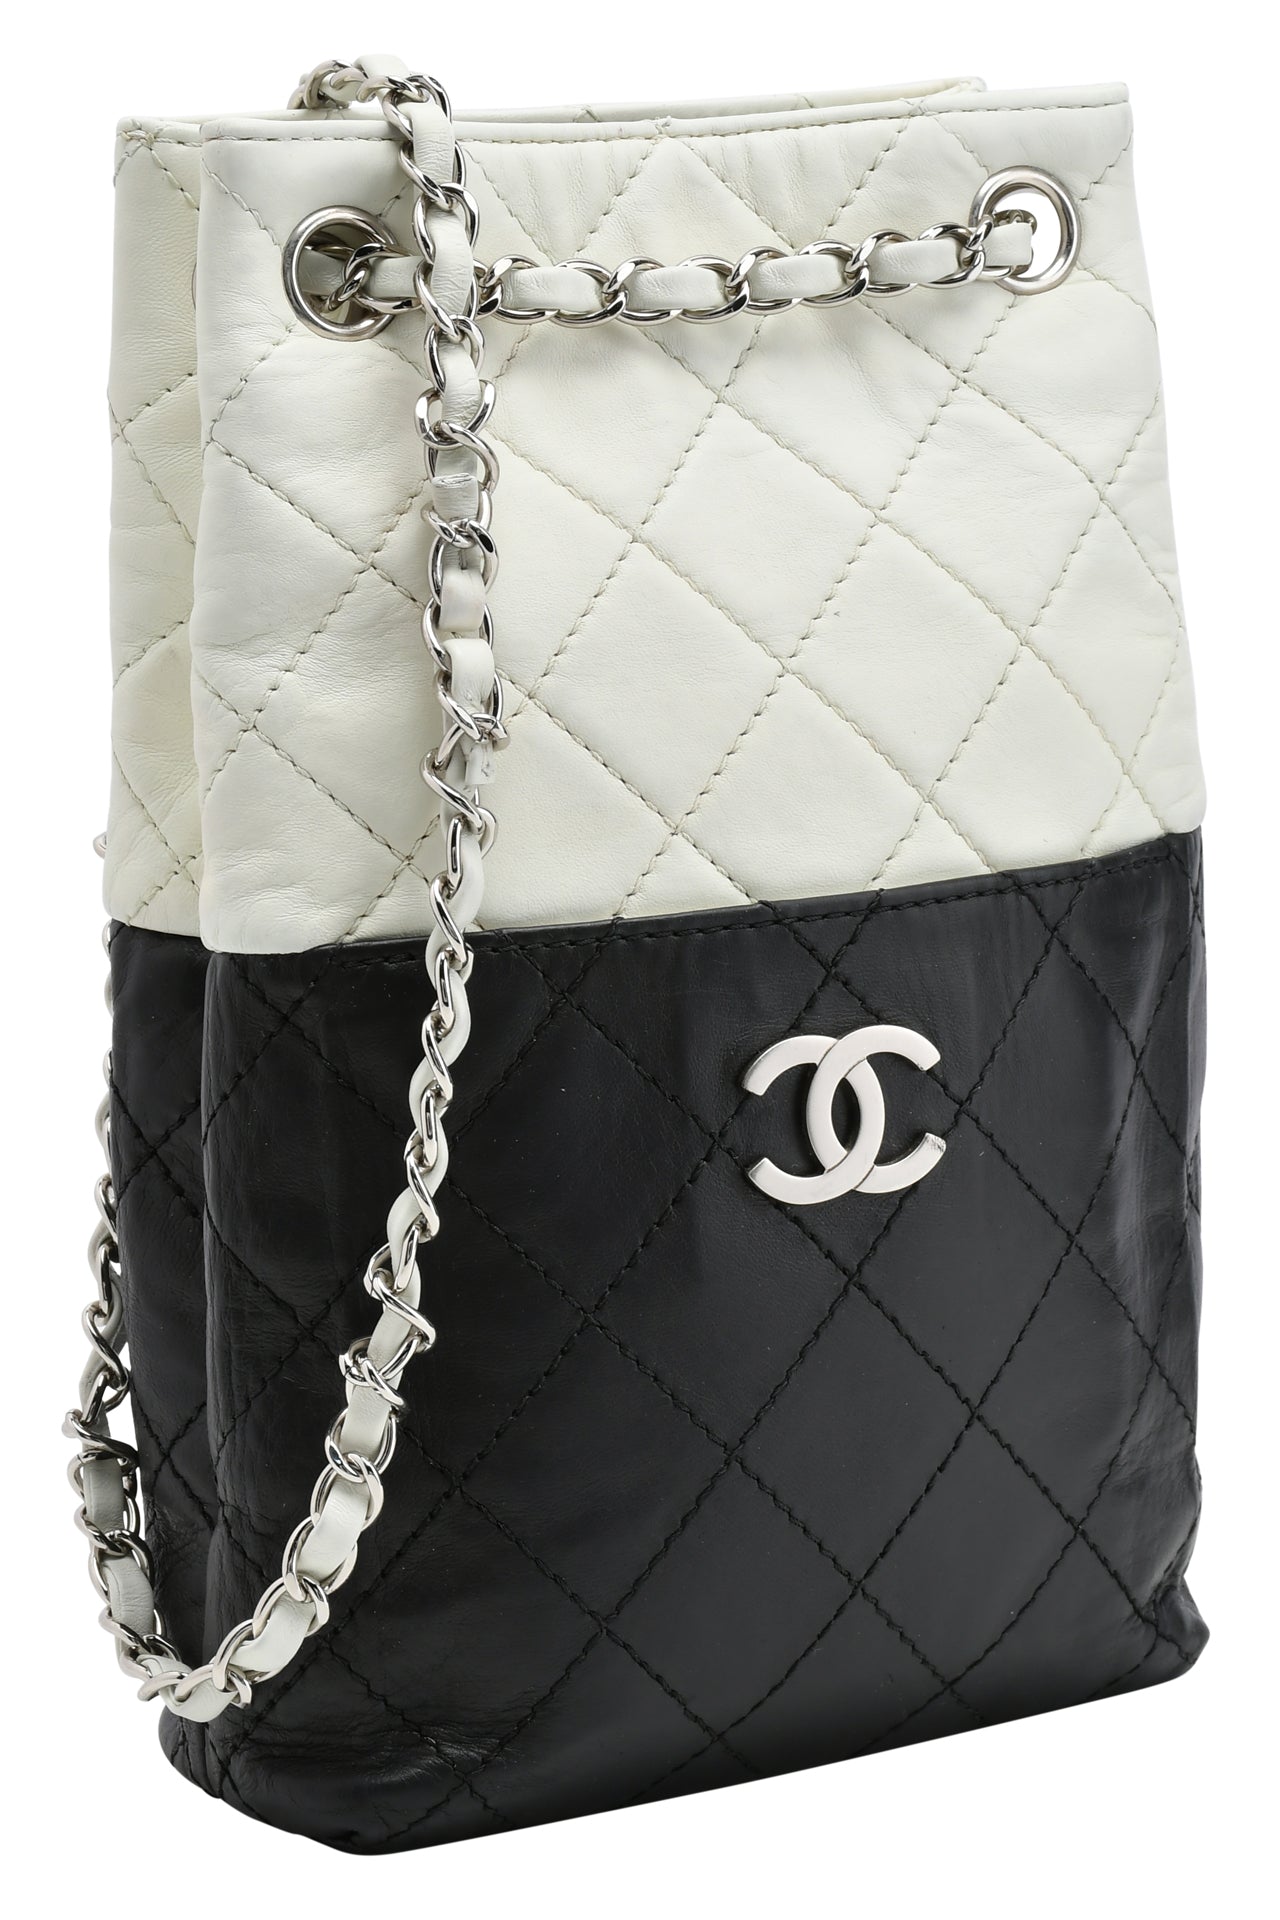 Chanel Black and White Lambskin Small Shopping Tote